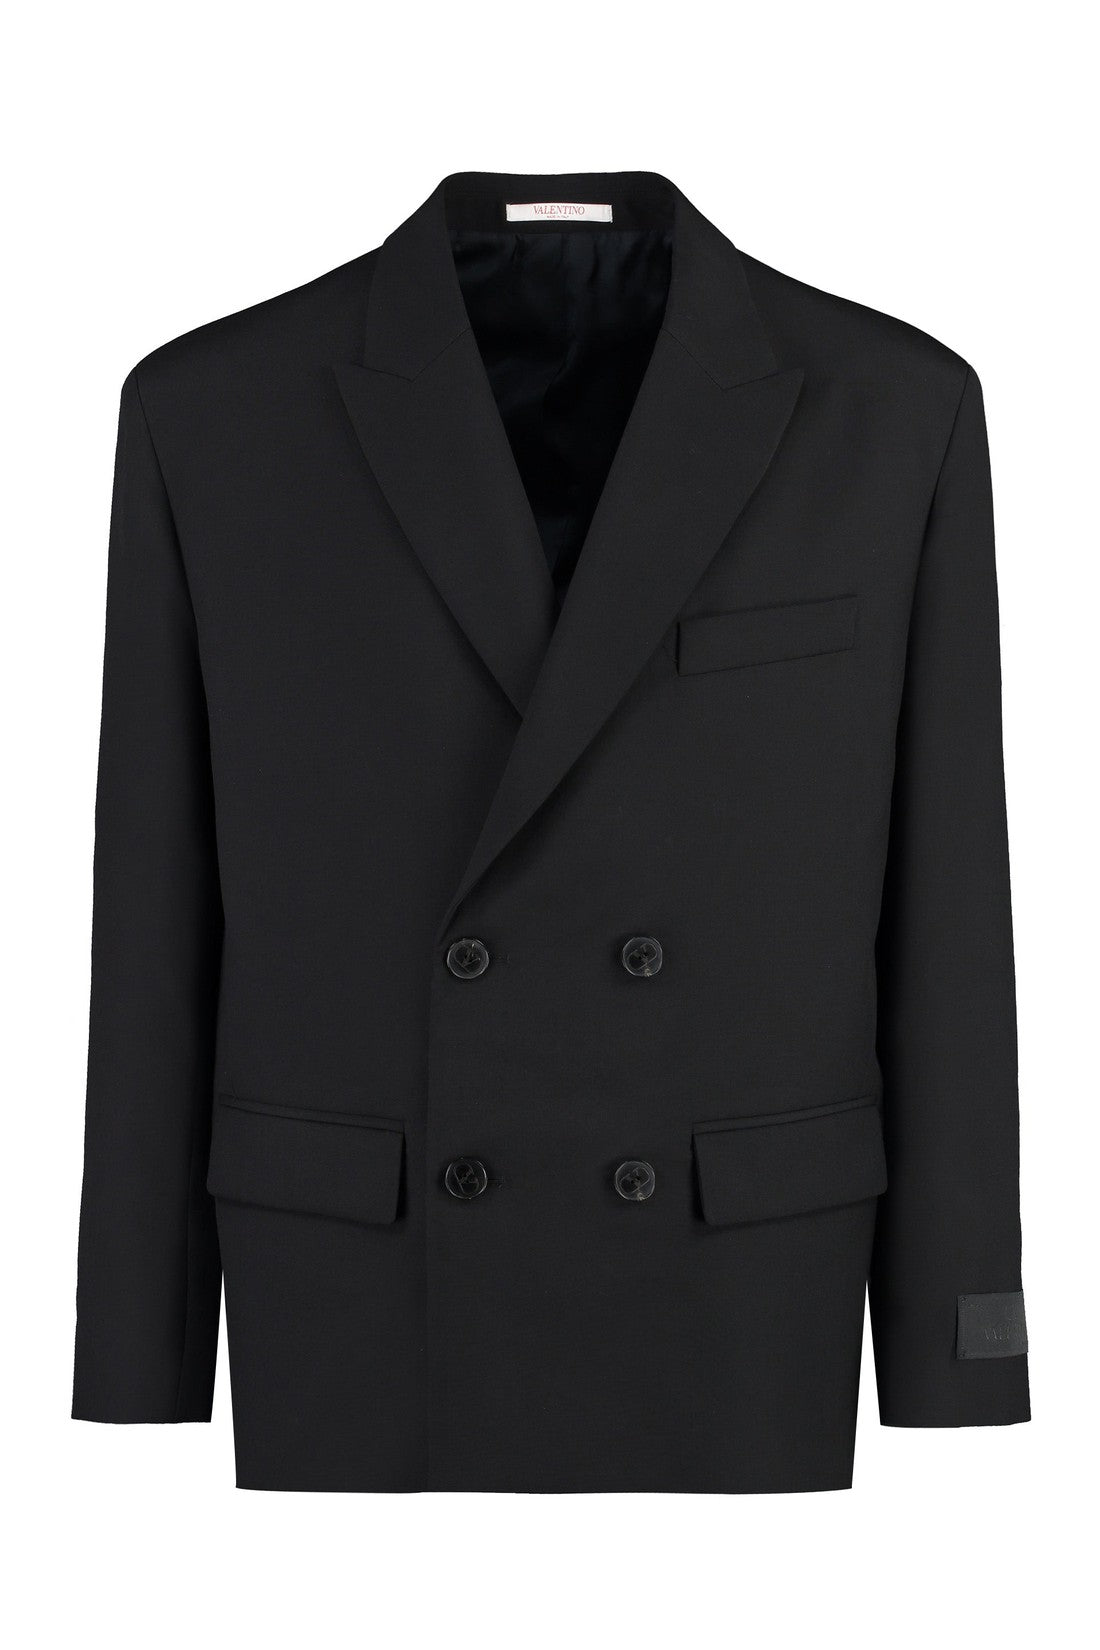 Valentino-OUTLET-SALE-Double-breasted wool blazer-ARCHIVIST